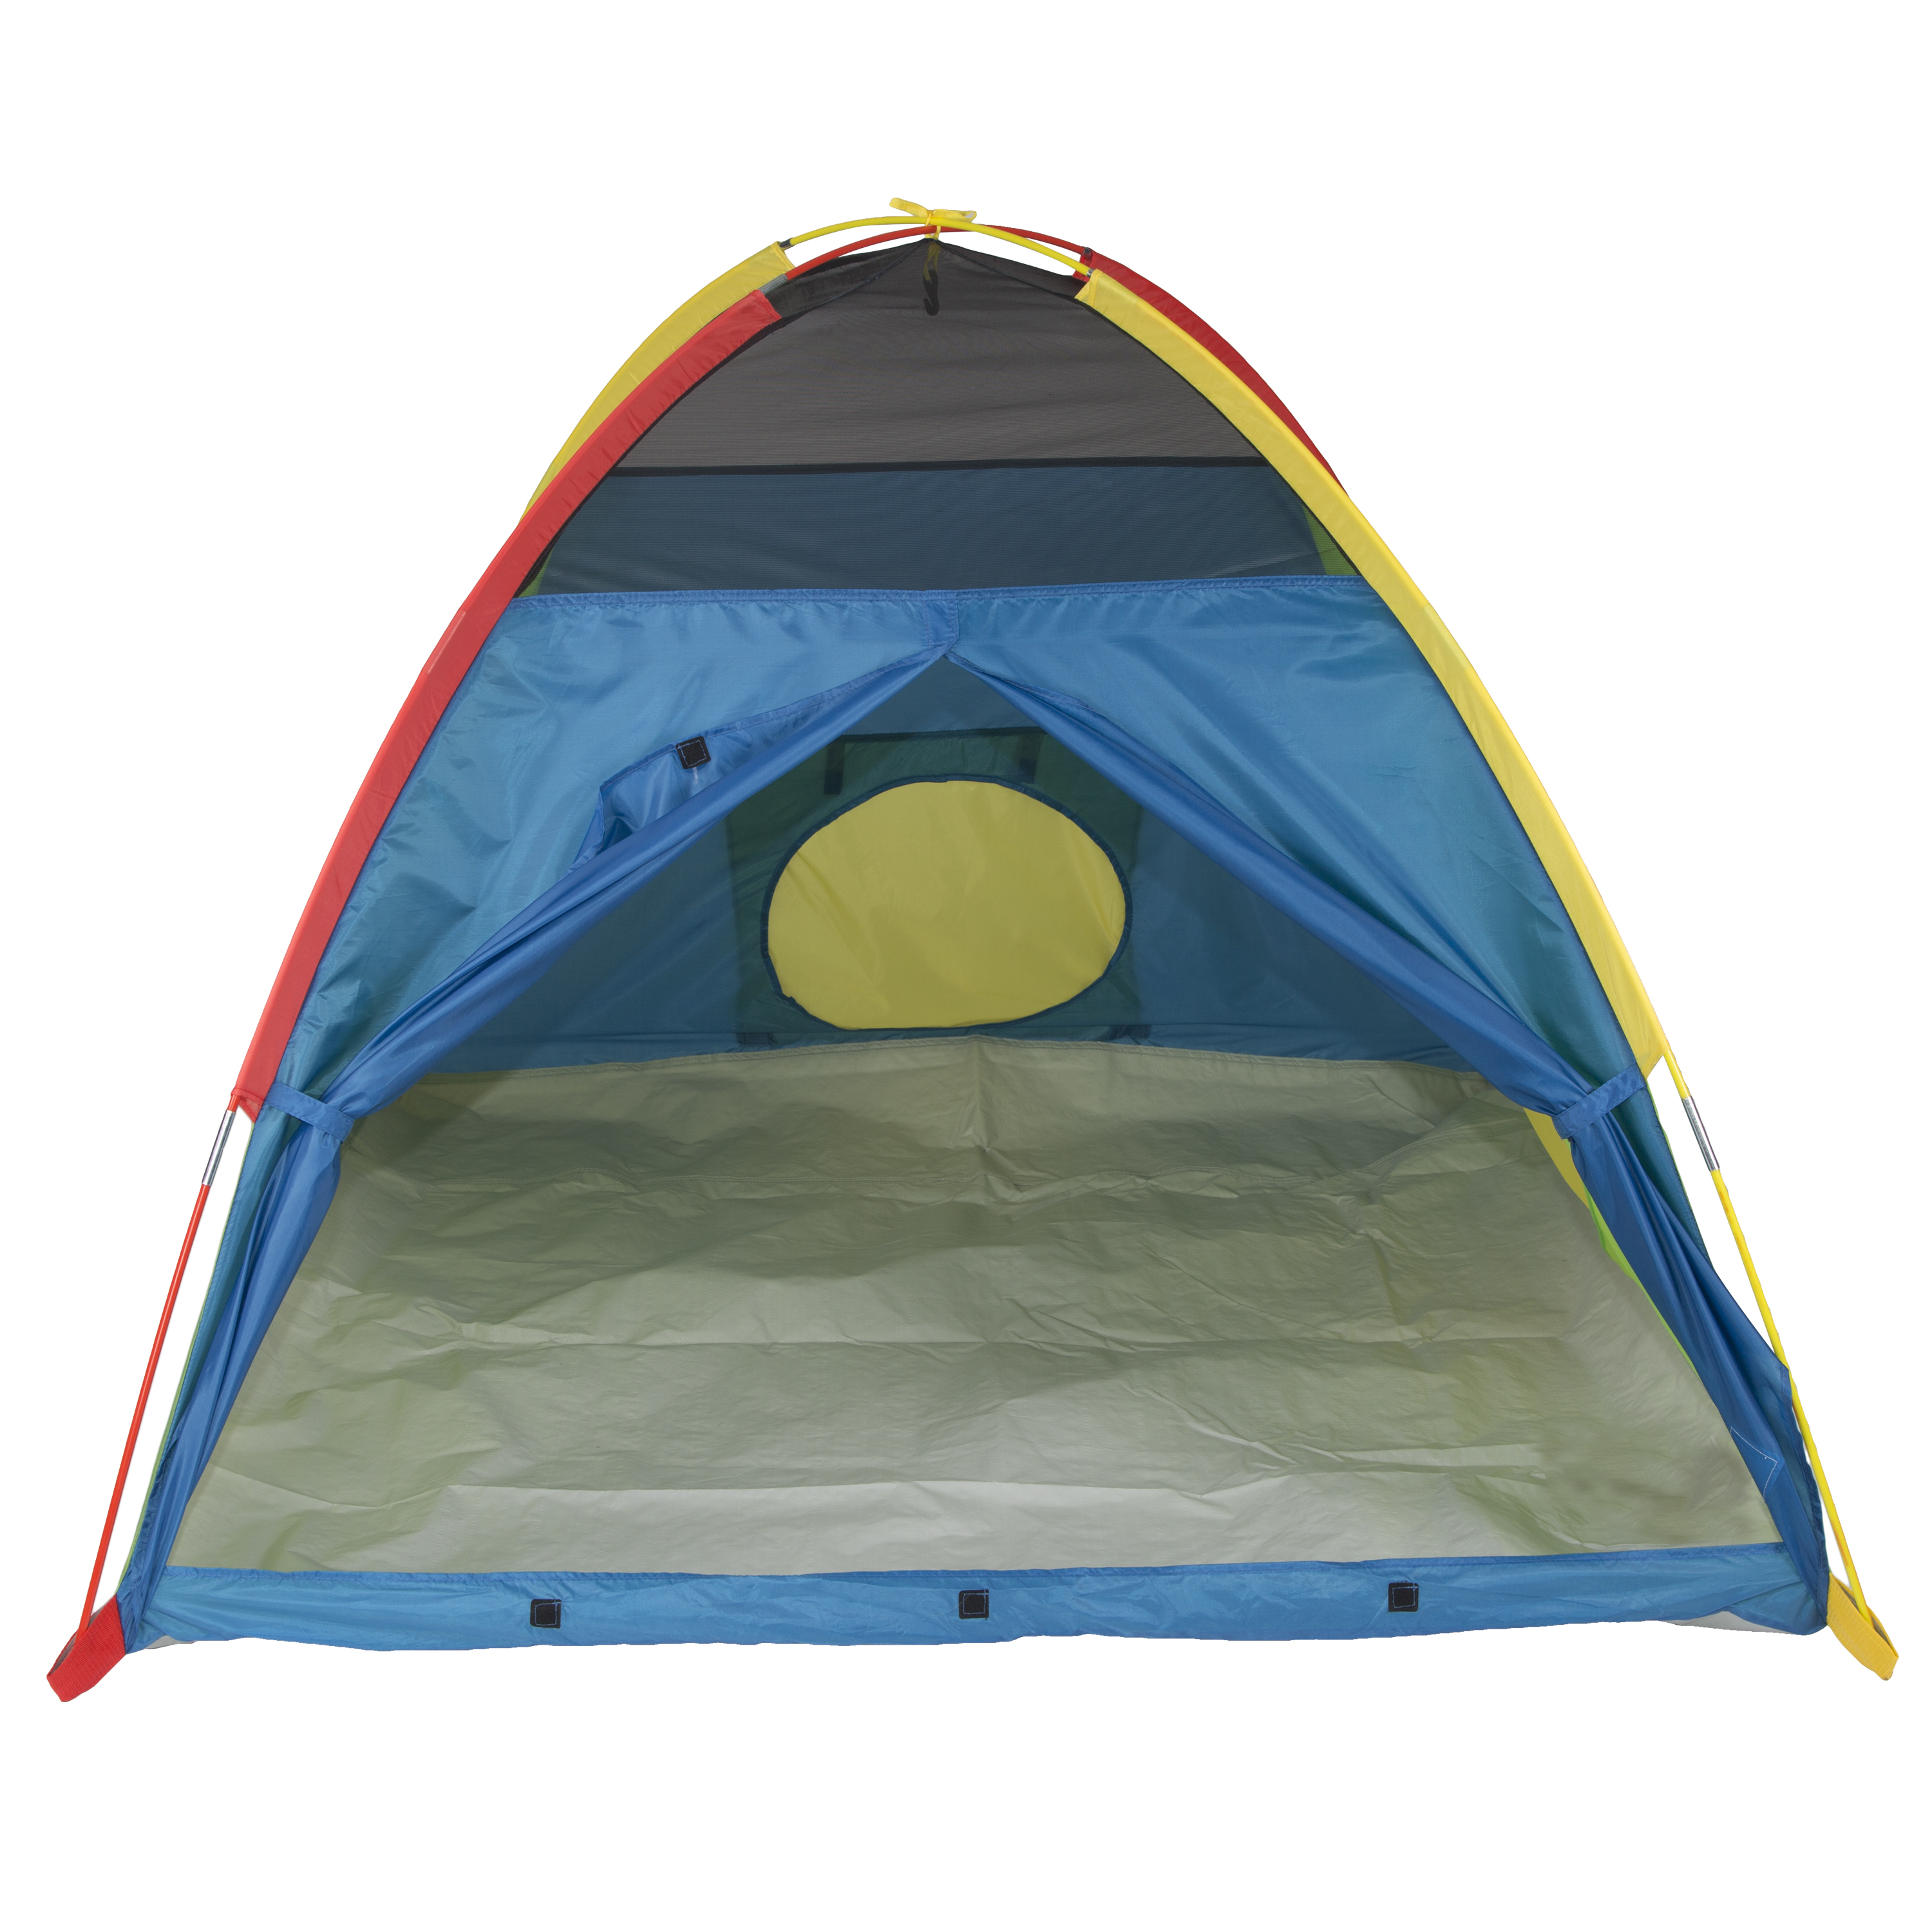 Pacific Play Tents Super Duper 4 Kid Play Tent - image 2 of 21